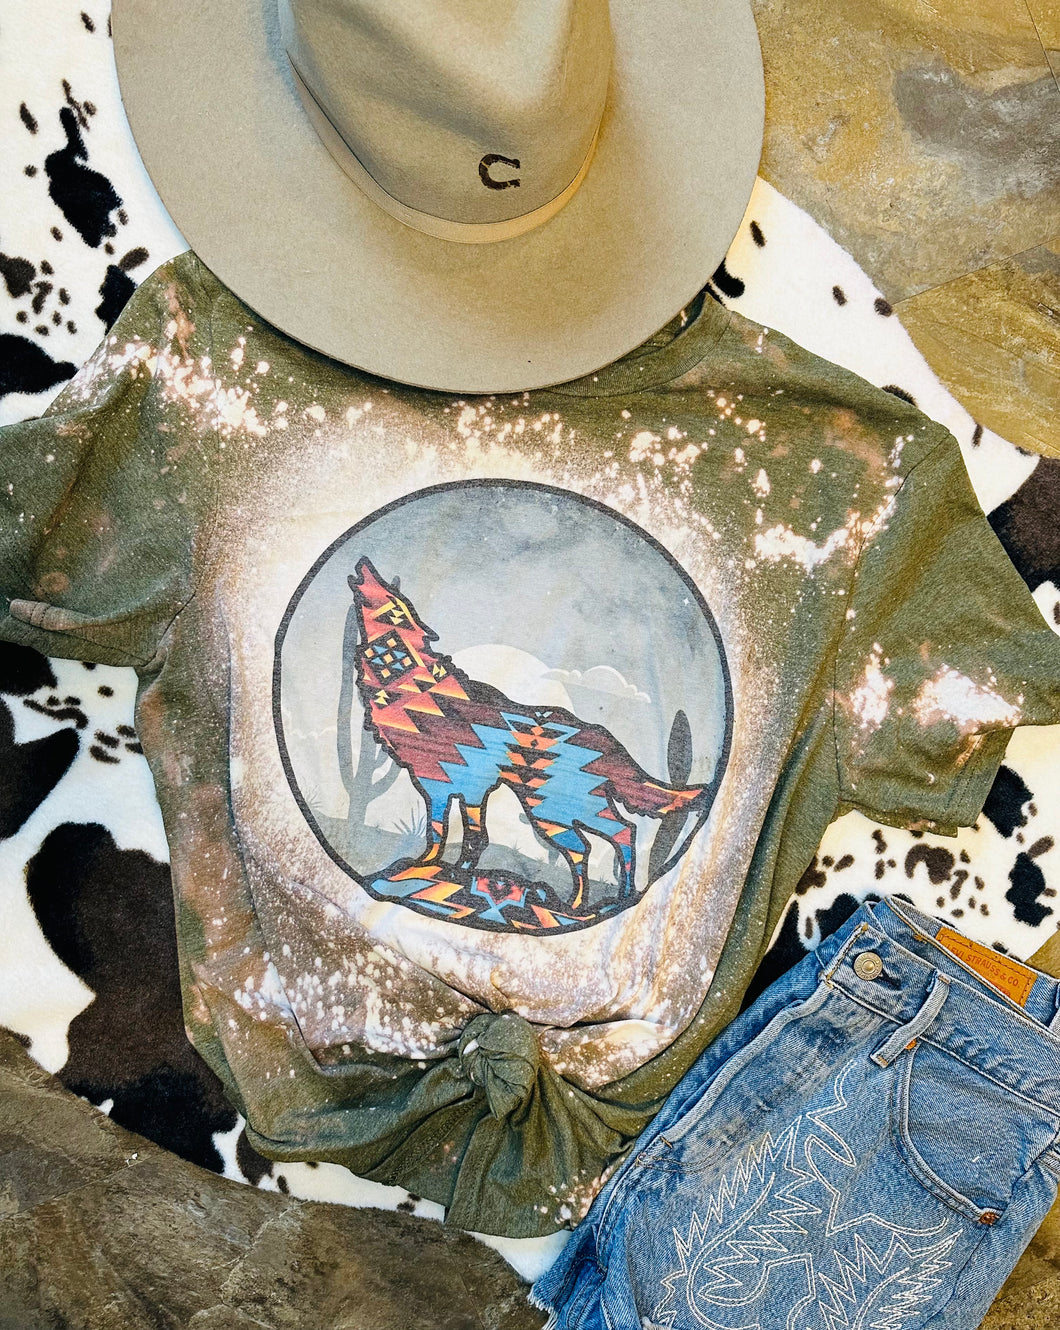 Howling coyote desert western bleached graphic tee - Mavictoria Designs Hot Press Express